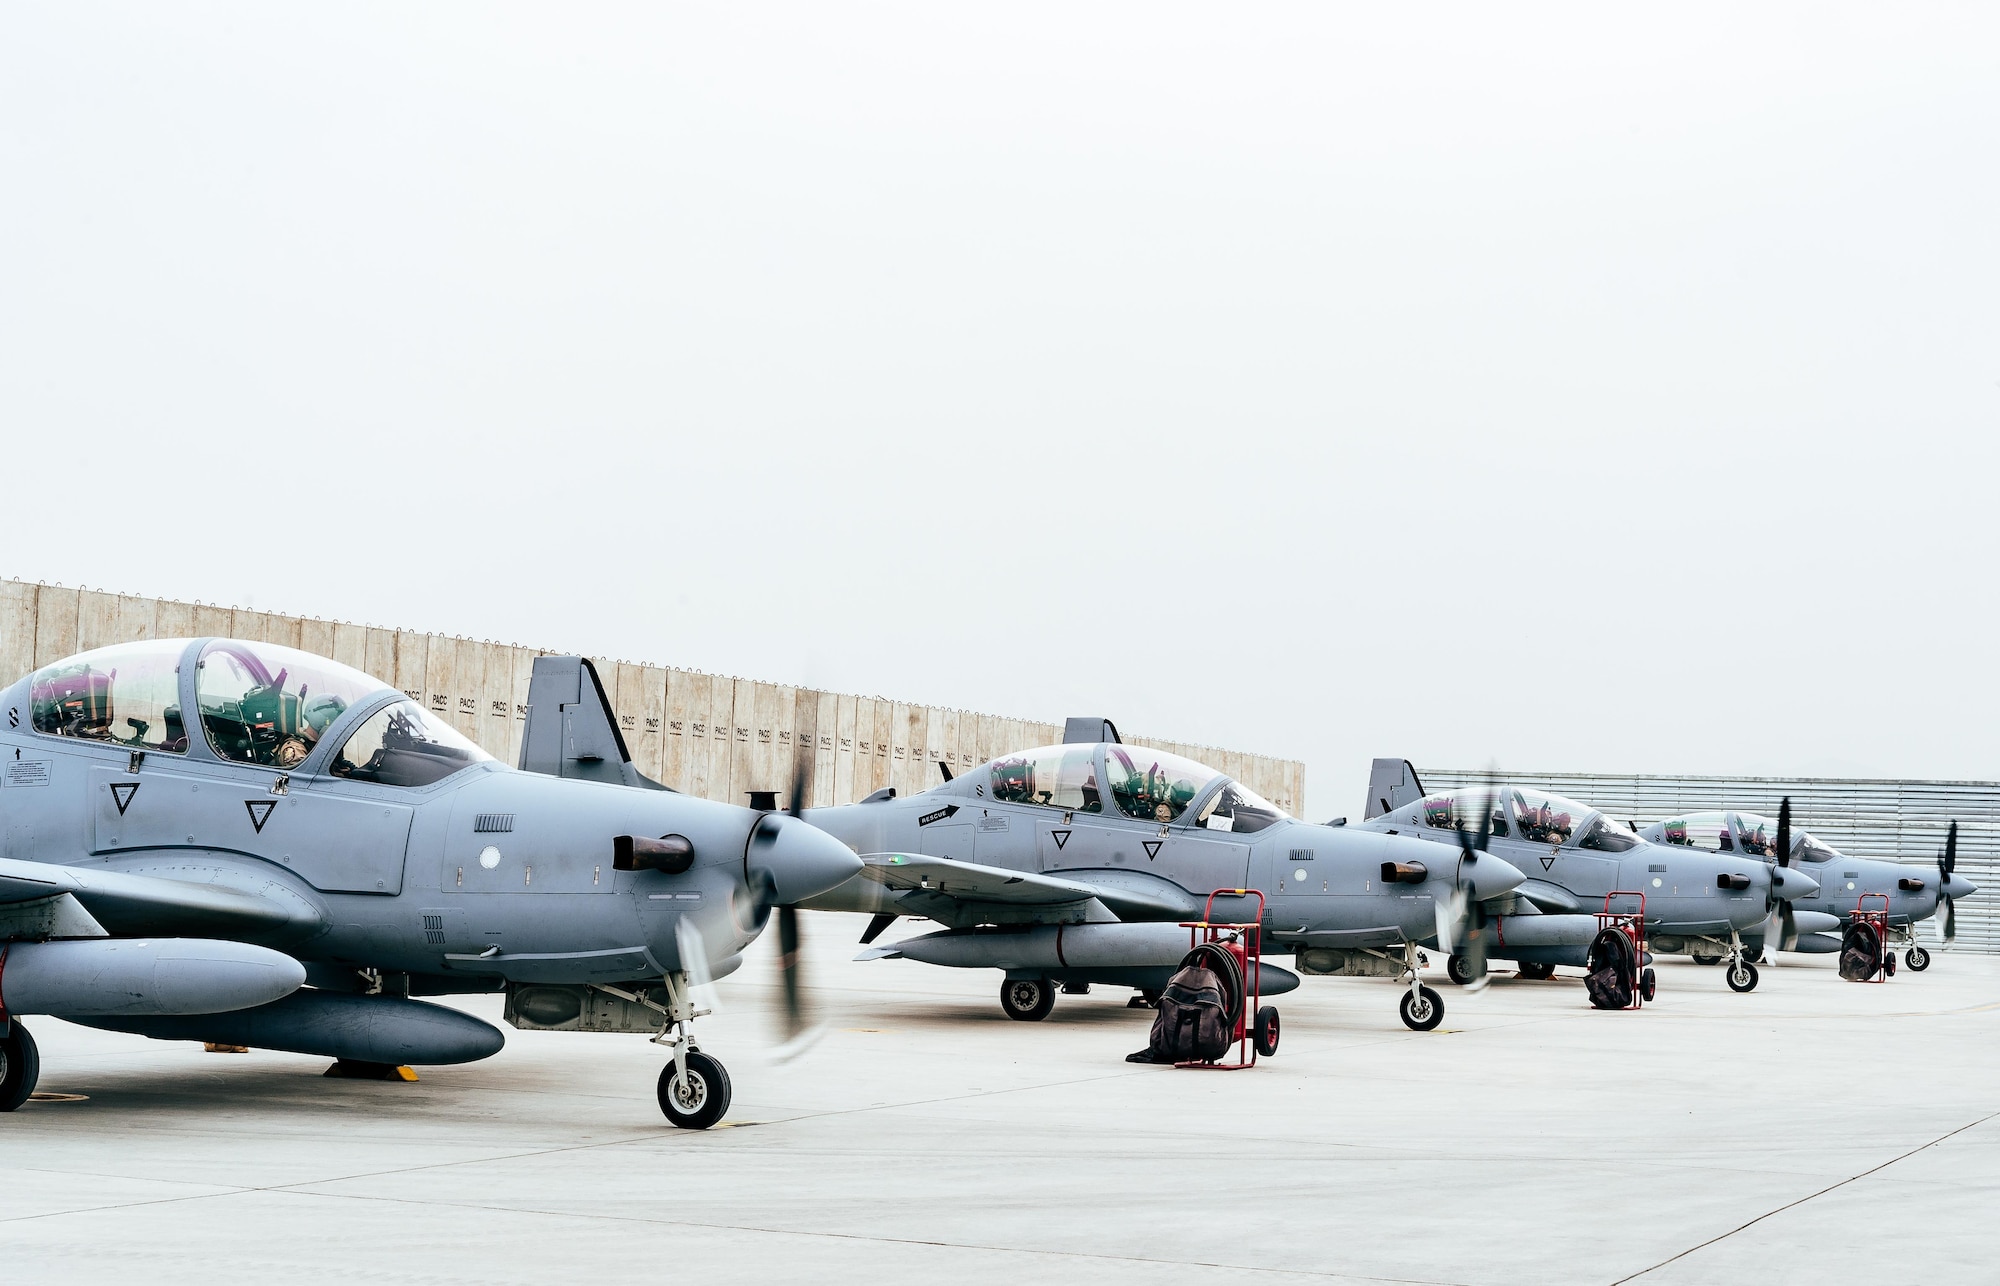 Four A-29 Super Tucanos arrive in Kabul, Afghanistan, March 20, 2017, before the beginning of the 2017 fighting season. The aircraft will bolster the Afghan Air Force's inventory from eight to 12 A-29s in country. Airmen from Train, Advise, Assist Command-Air, as part of Resolute Support Mission, work in tandem with their Afghan counterparts fostering a working relationship and fortifying confidence in the mission. (U.S. Air Force photo by Senior Airman Jordan Castelan)